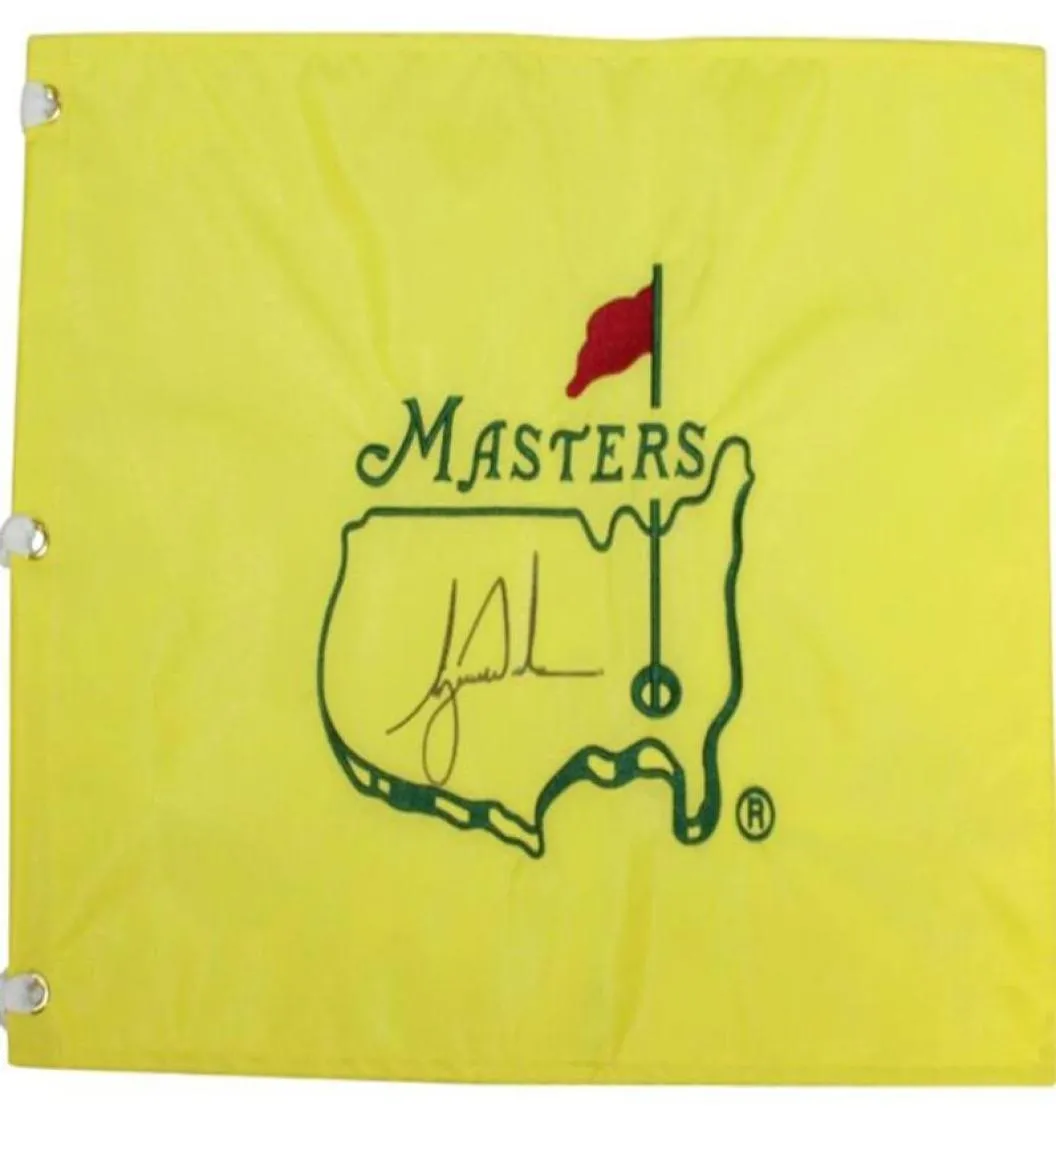 Tees Tiger Woods Signed Autograp Signatured Auto 1997 2001 2006 2005 2019 Championship Masters Open 2000 British Open8539735